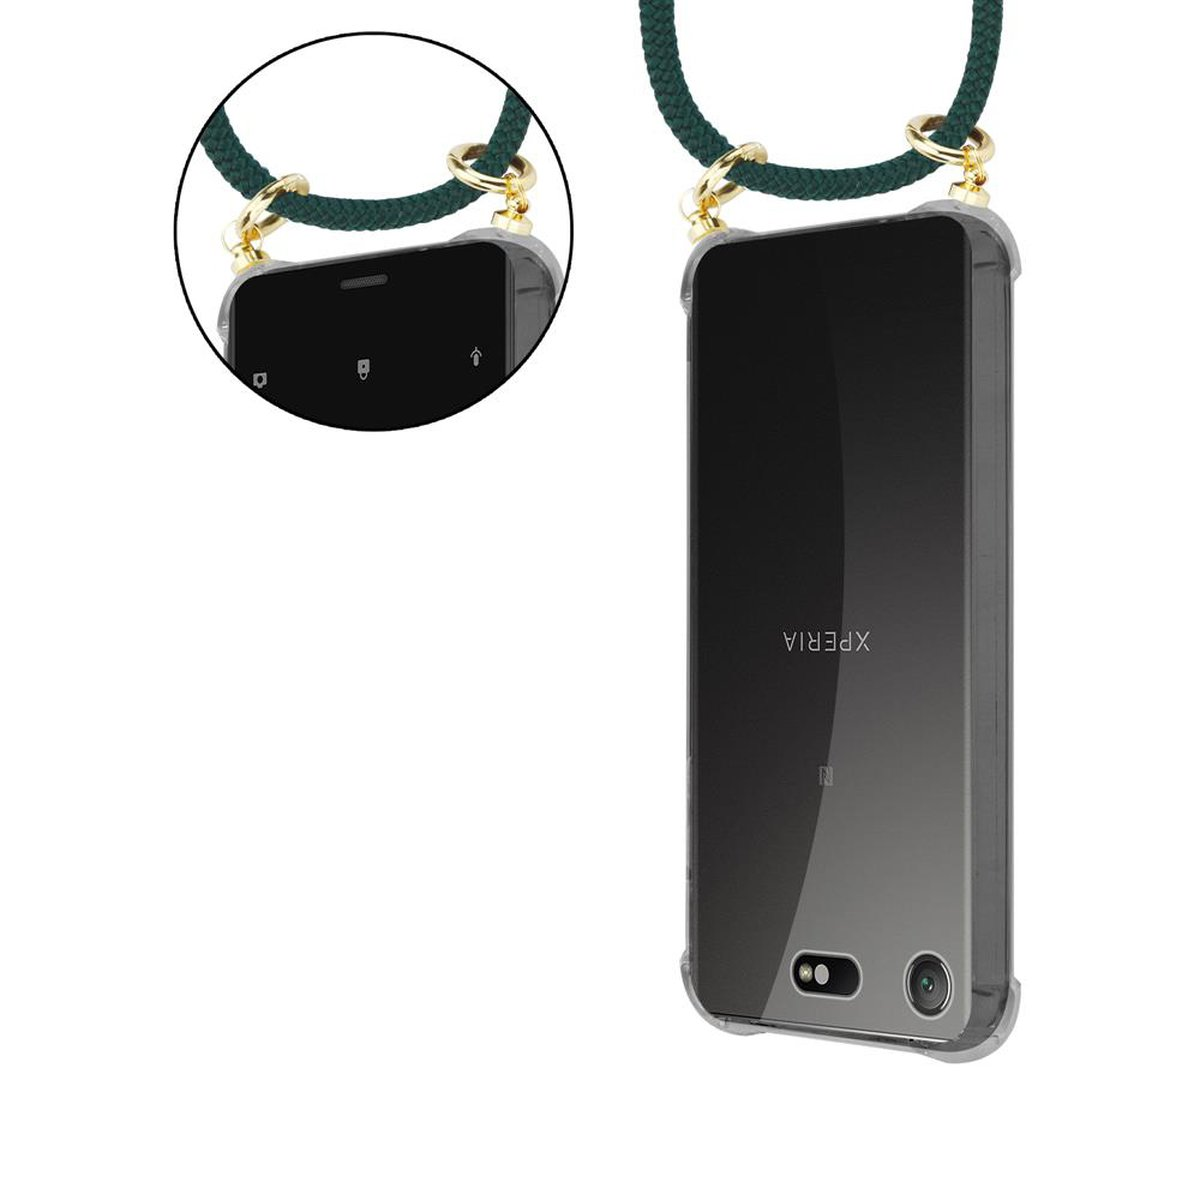 Hülle, COMPACT, XZ1 abnehmbarer Sony, Handy Backcover, Xperia Kordel Gold GRÜN Band ARMEE mit und Ringen, CADORABO Kette